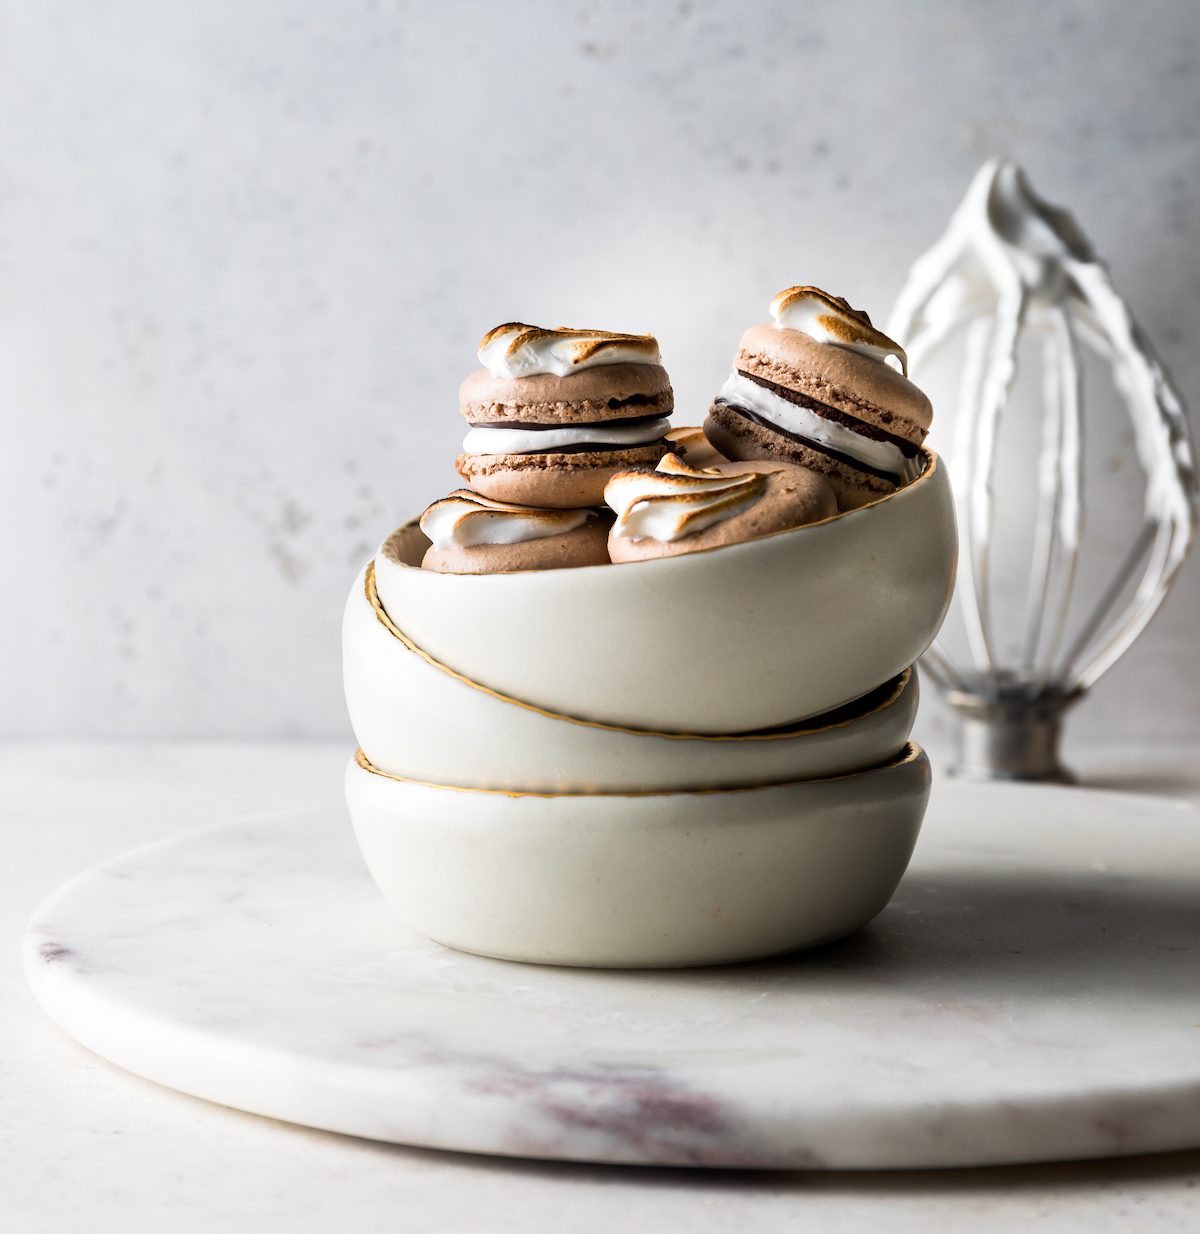 A bowl of chocolate French macarons with marshmallow filling and mexican hot chocolate glaze